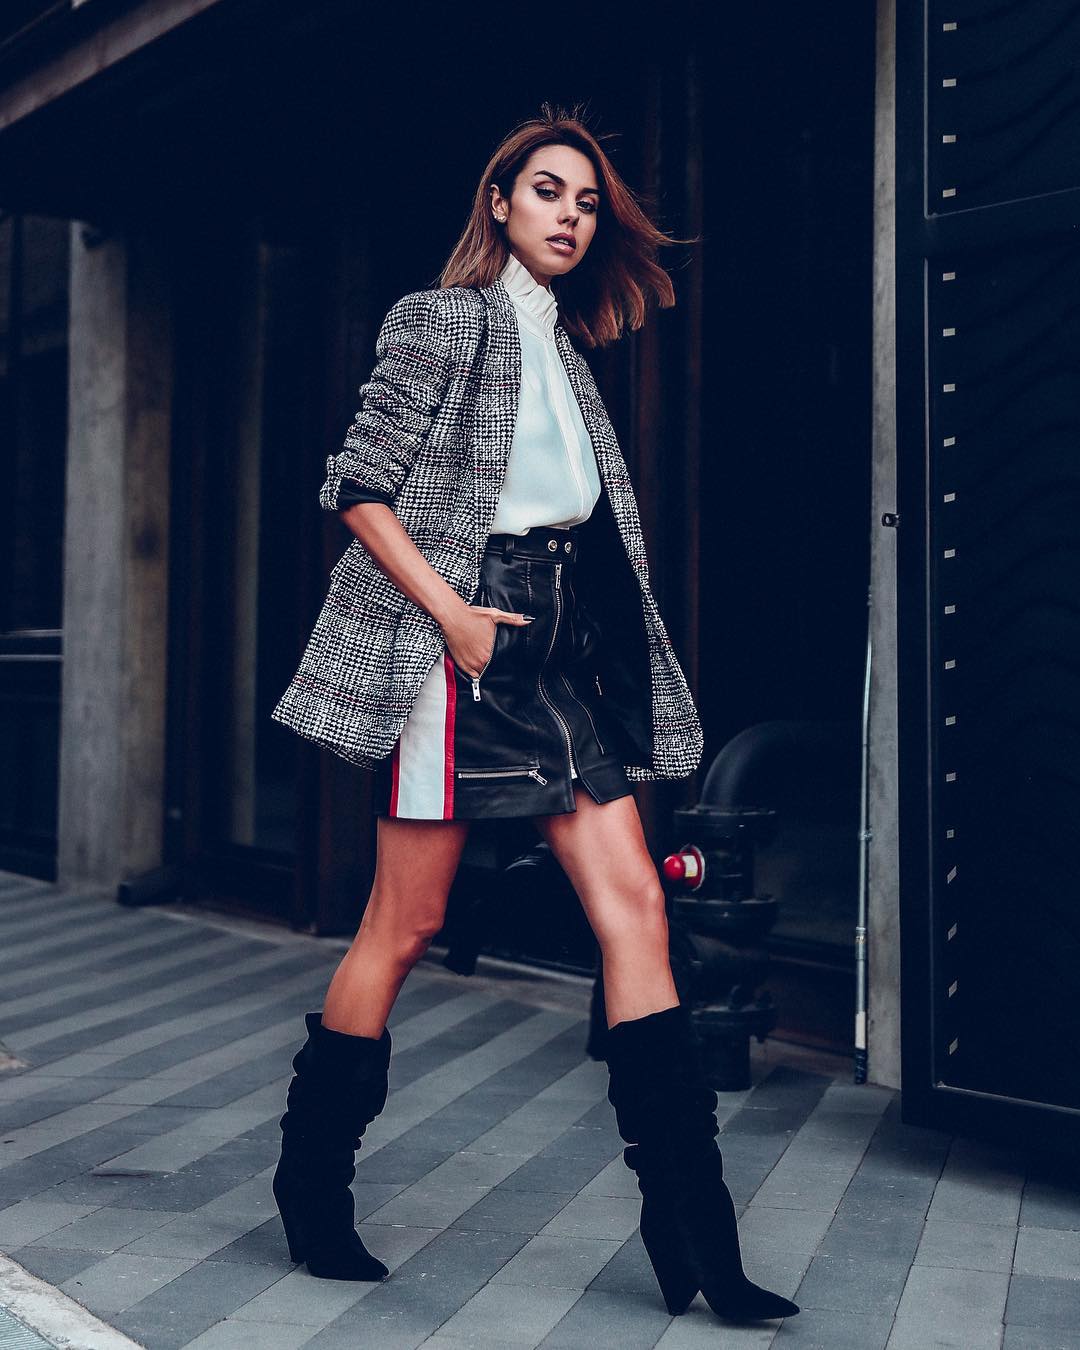 A leather skirt and check coat